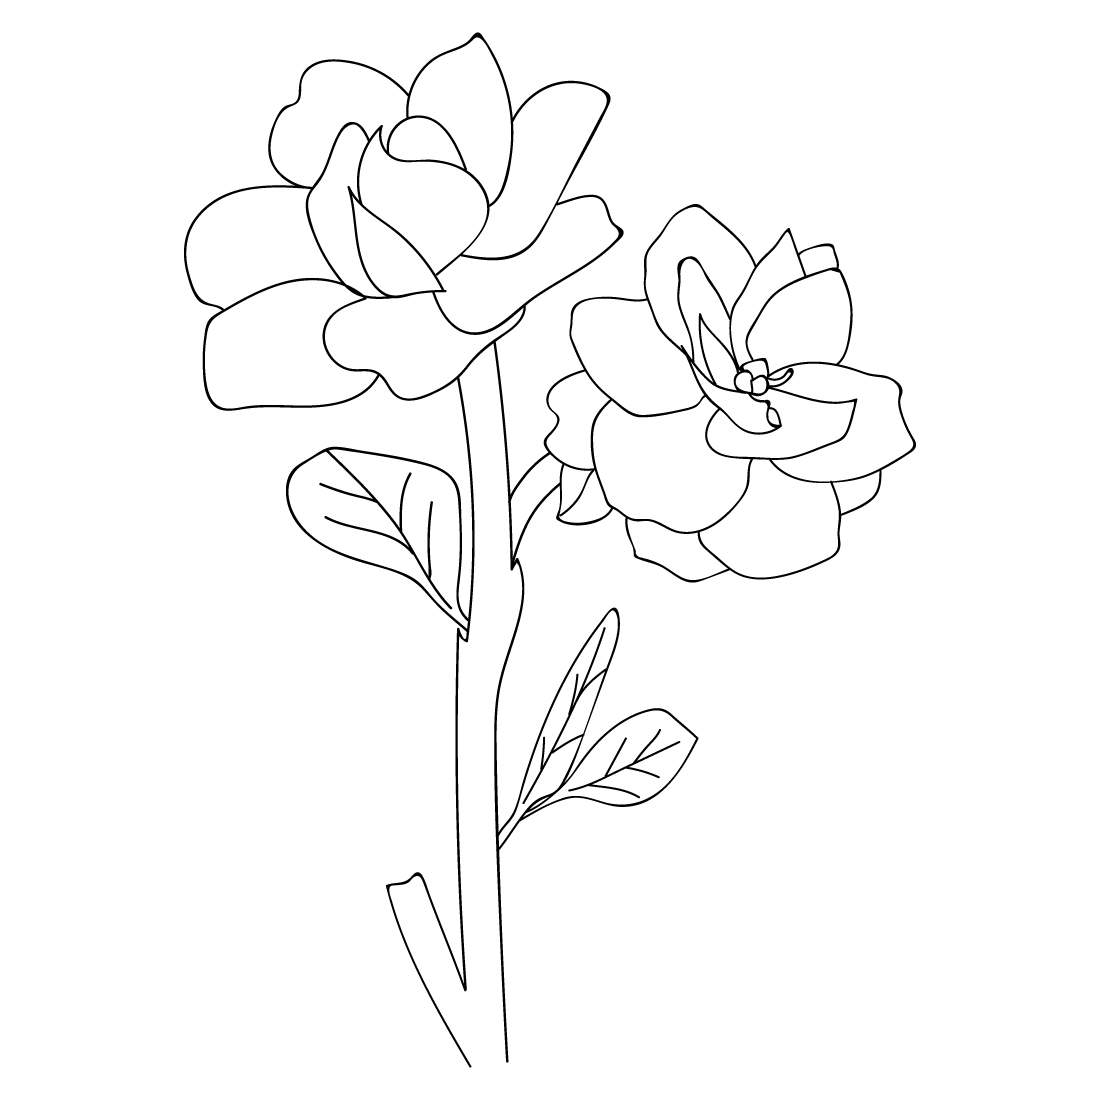 Minimal Aesthetic Flowers | Line Art by rawpixel.com for rawpixel on  Dribbble